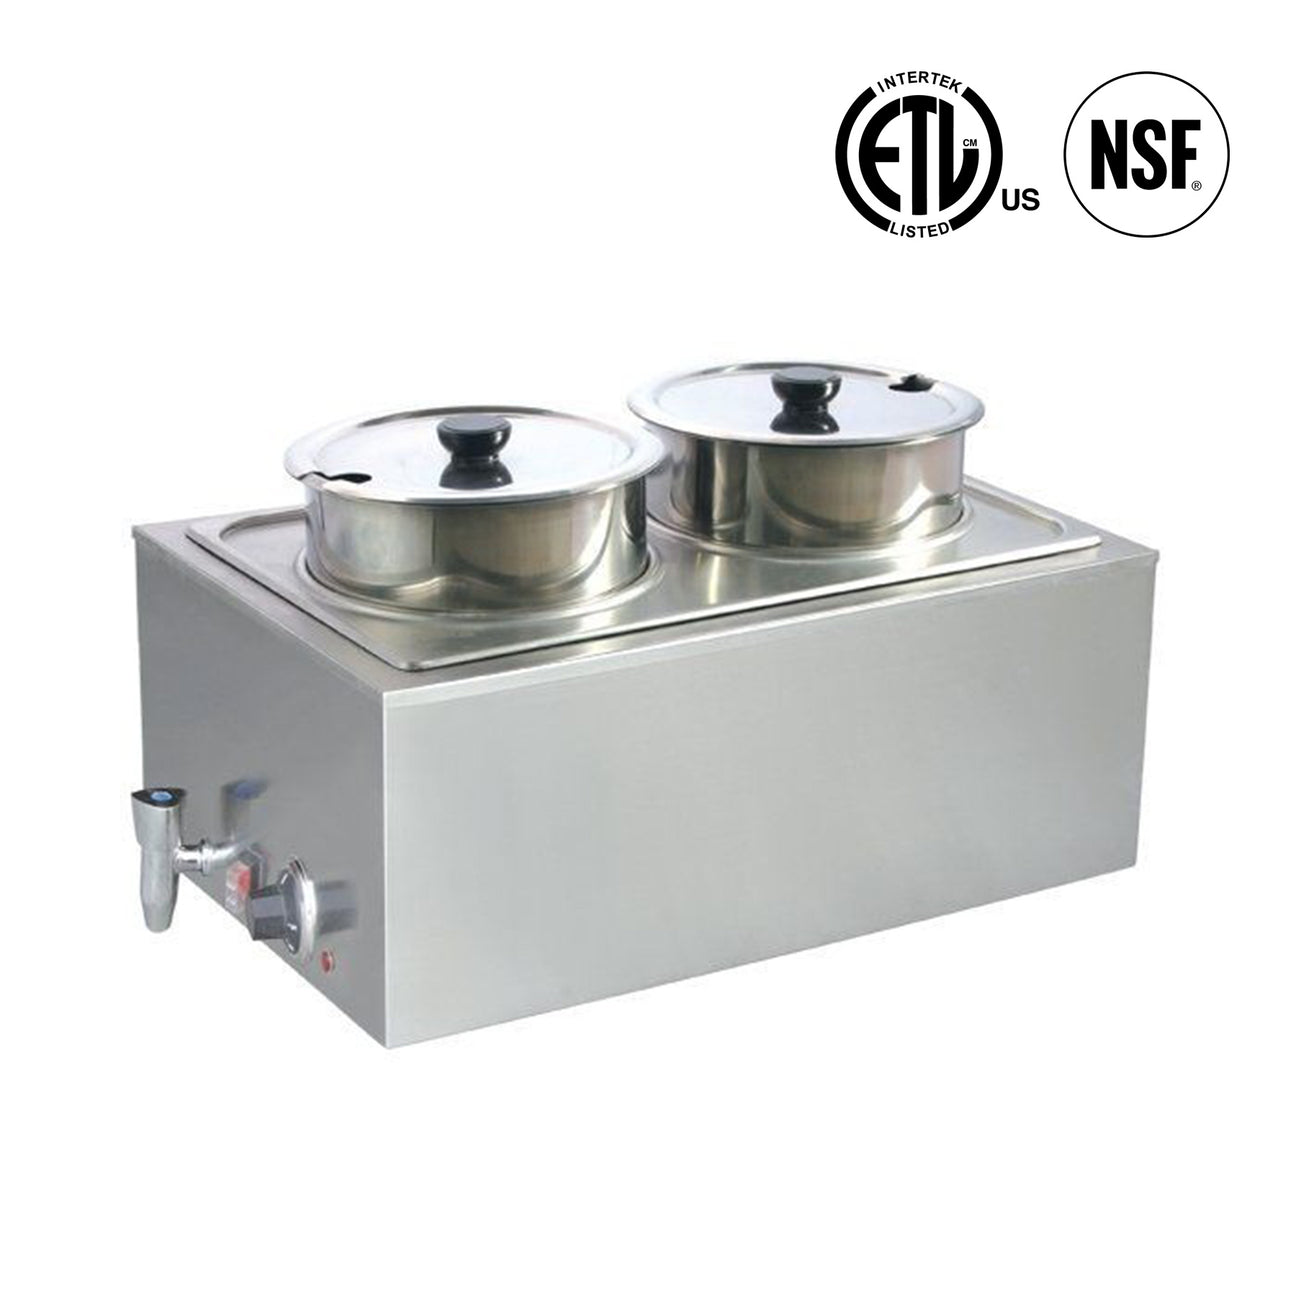 Electrical Double Food Warmer